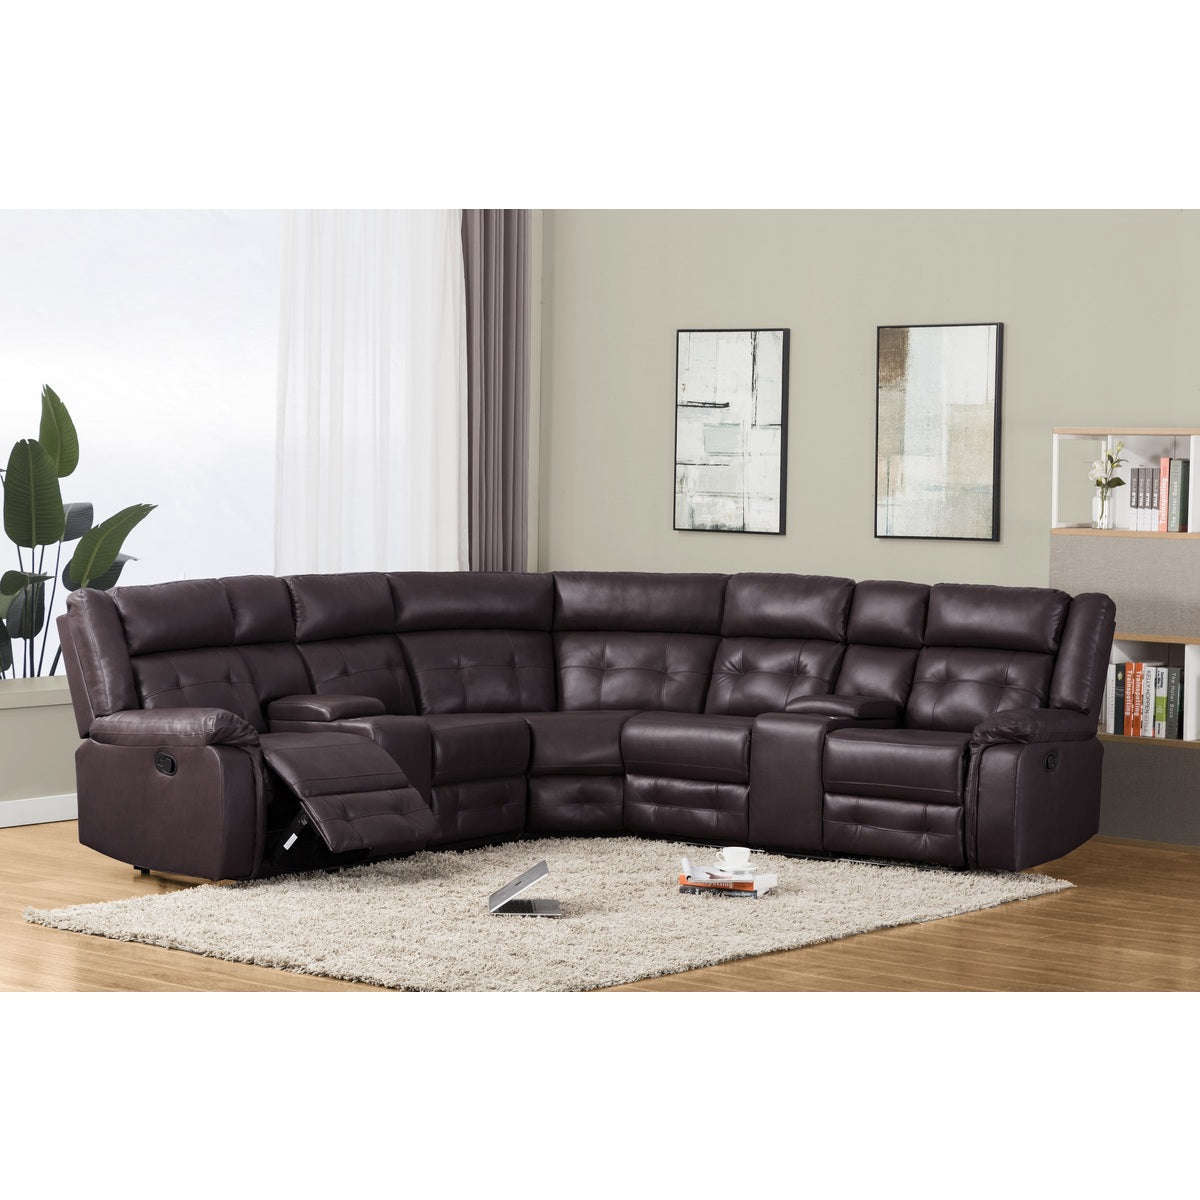 Brown Modern Sleek Contemporary Solid Wood And Plywood Faux Leather Tufted Finish Sectional